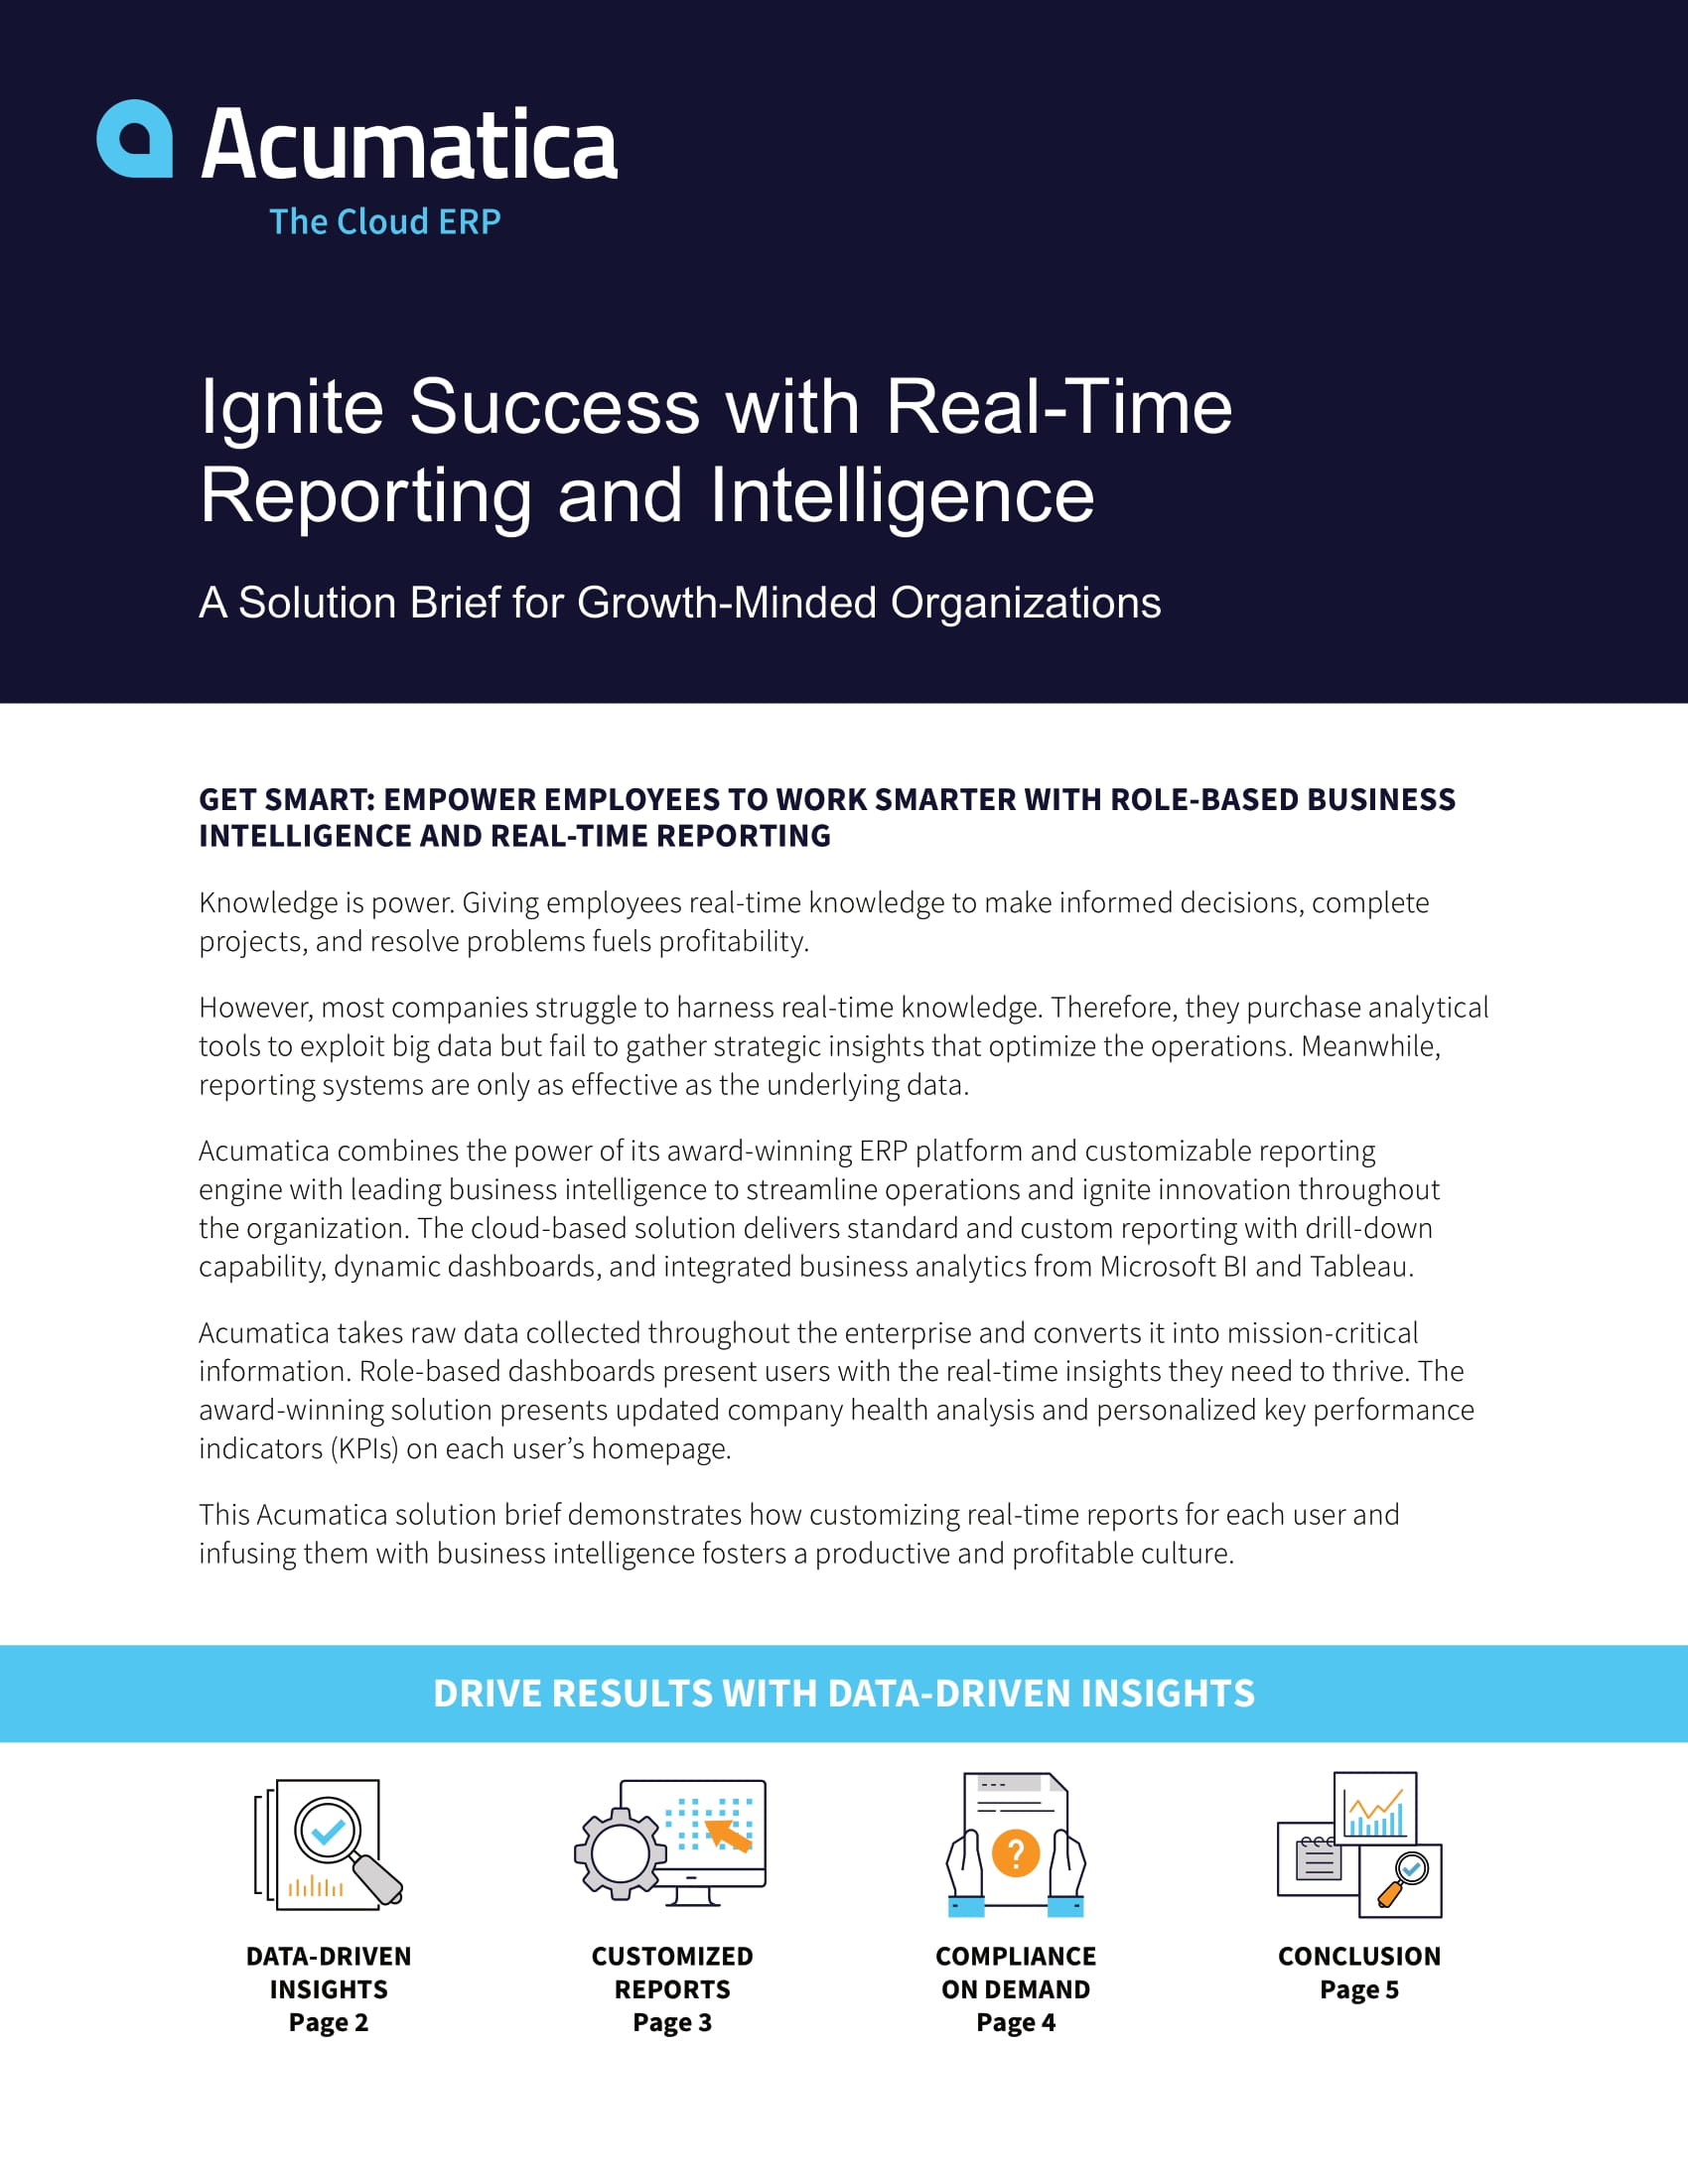 Raw Data + Integrated Business Analytics + Acumatica = Real-Time Reporting and Intelligence